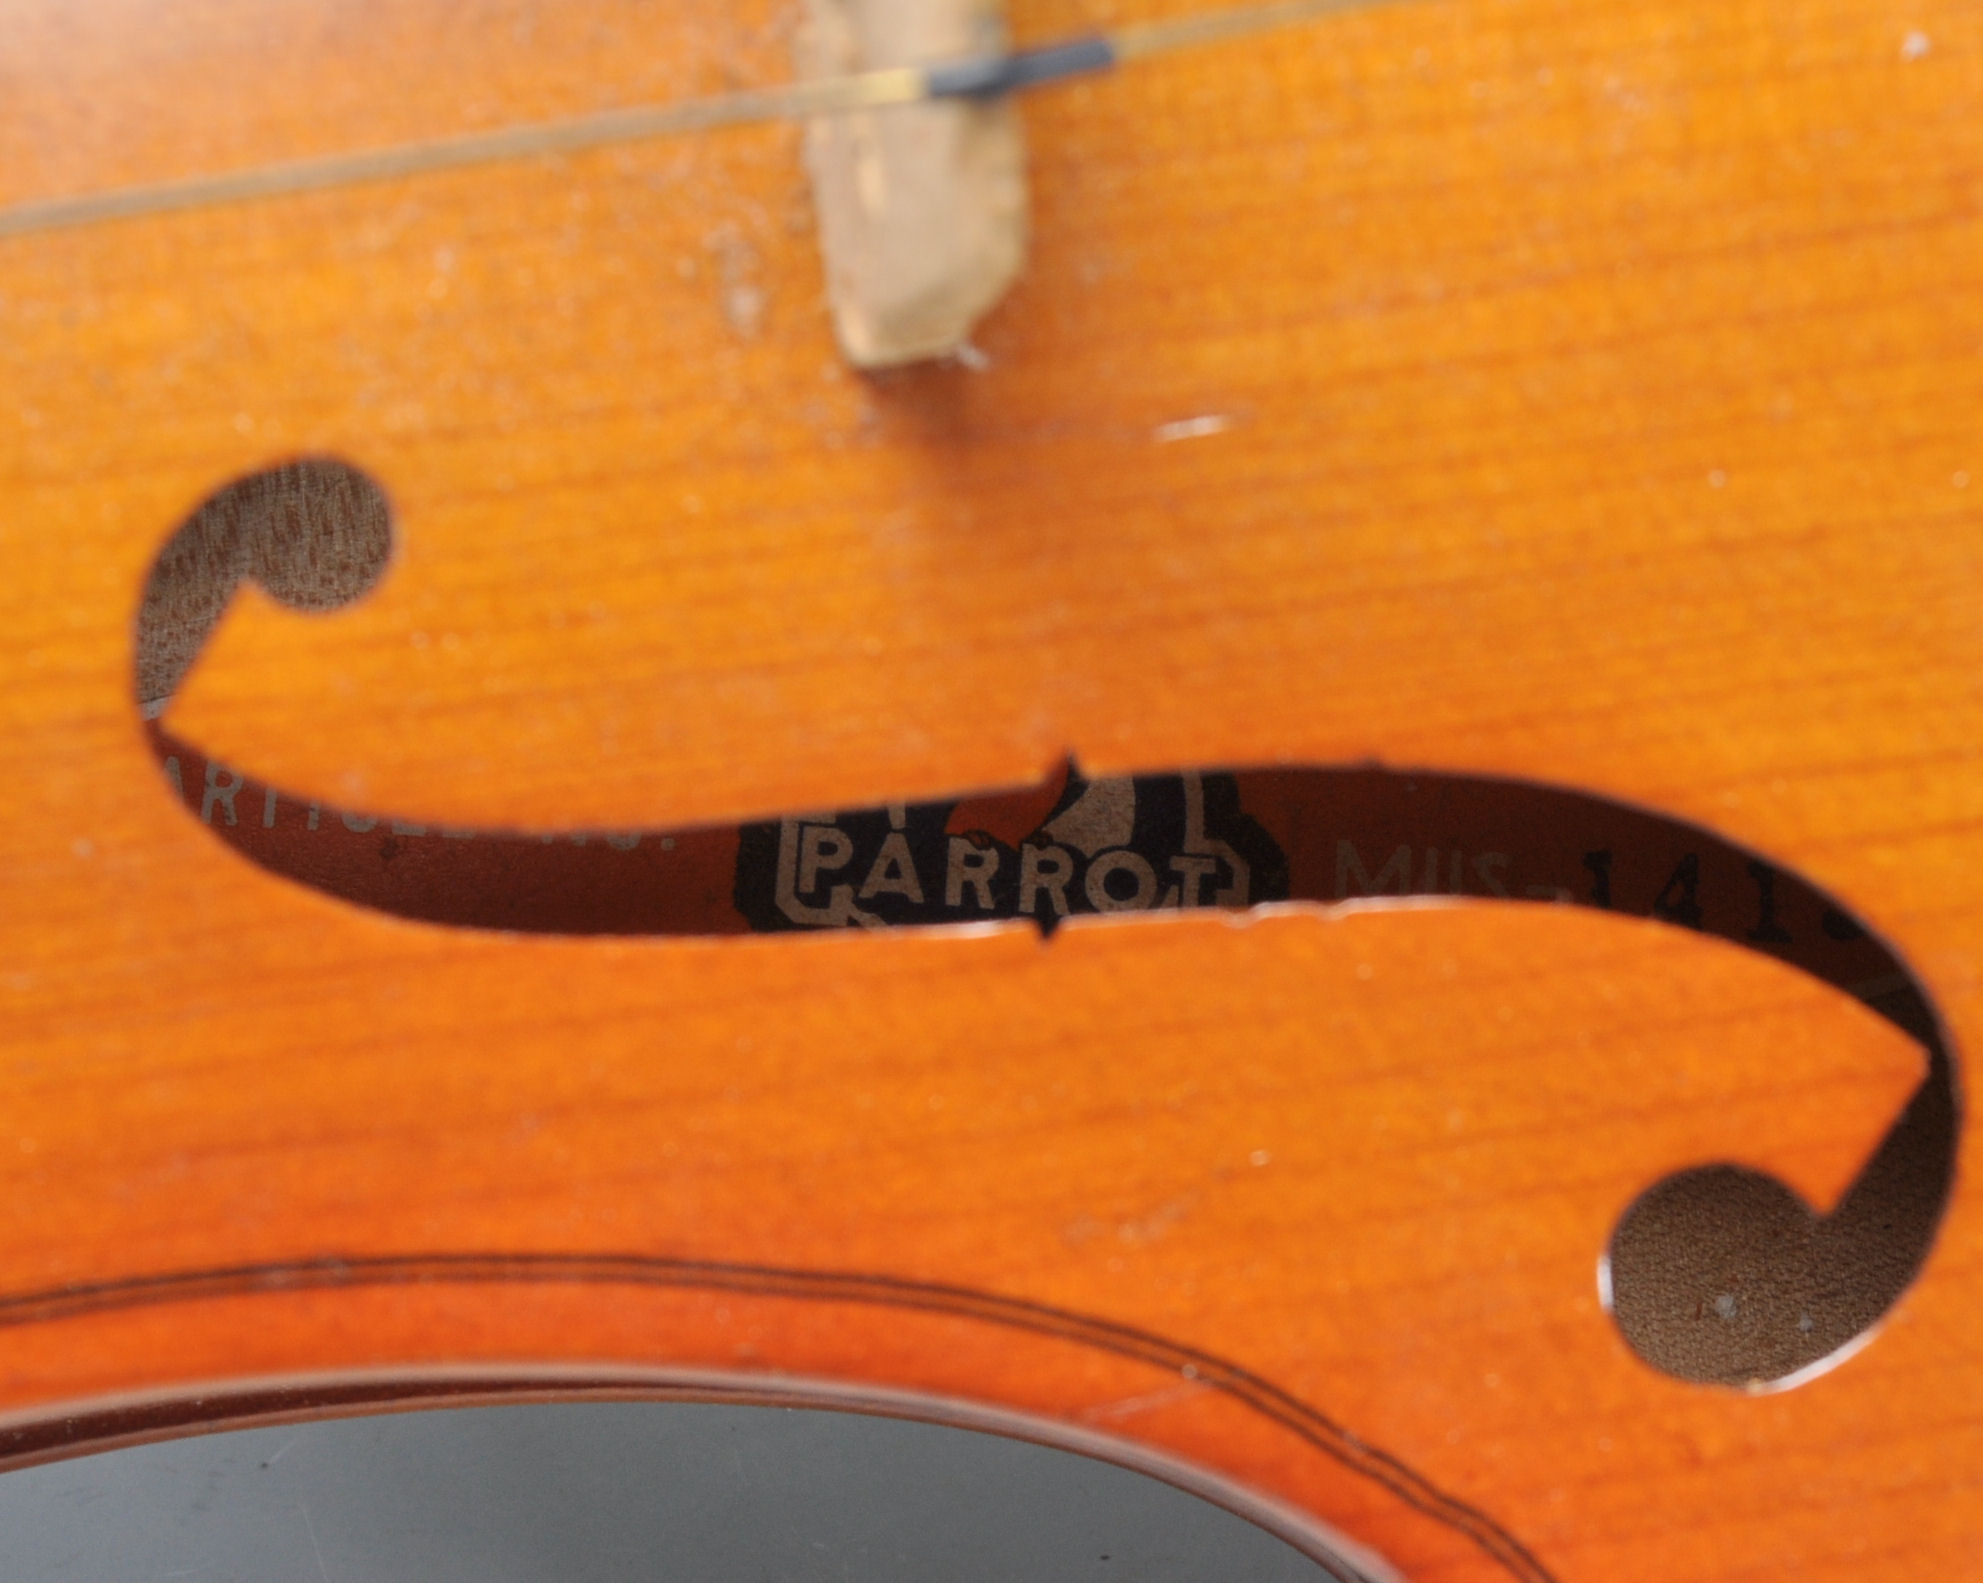 A 20th Century full size violin with two piece bac - Image 17 of 18